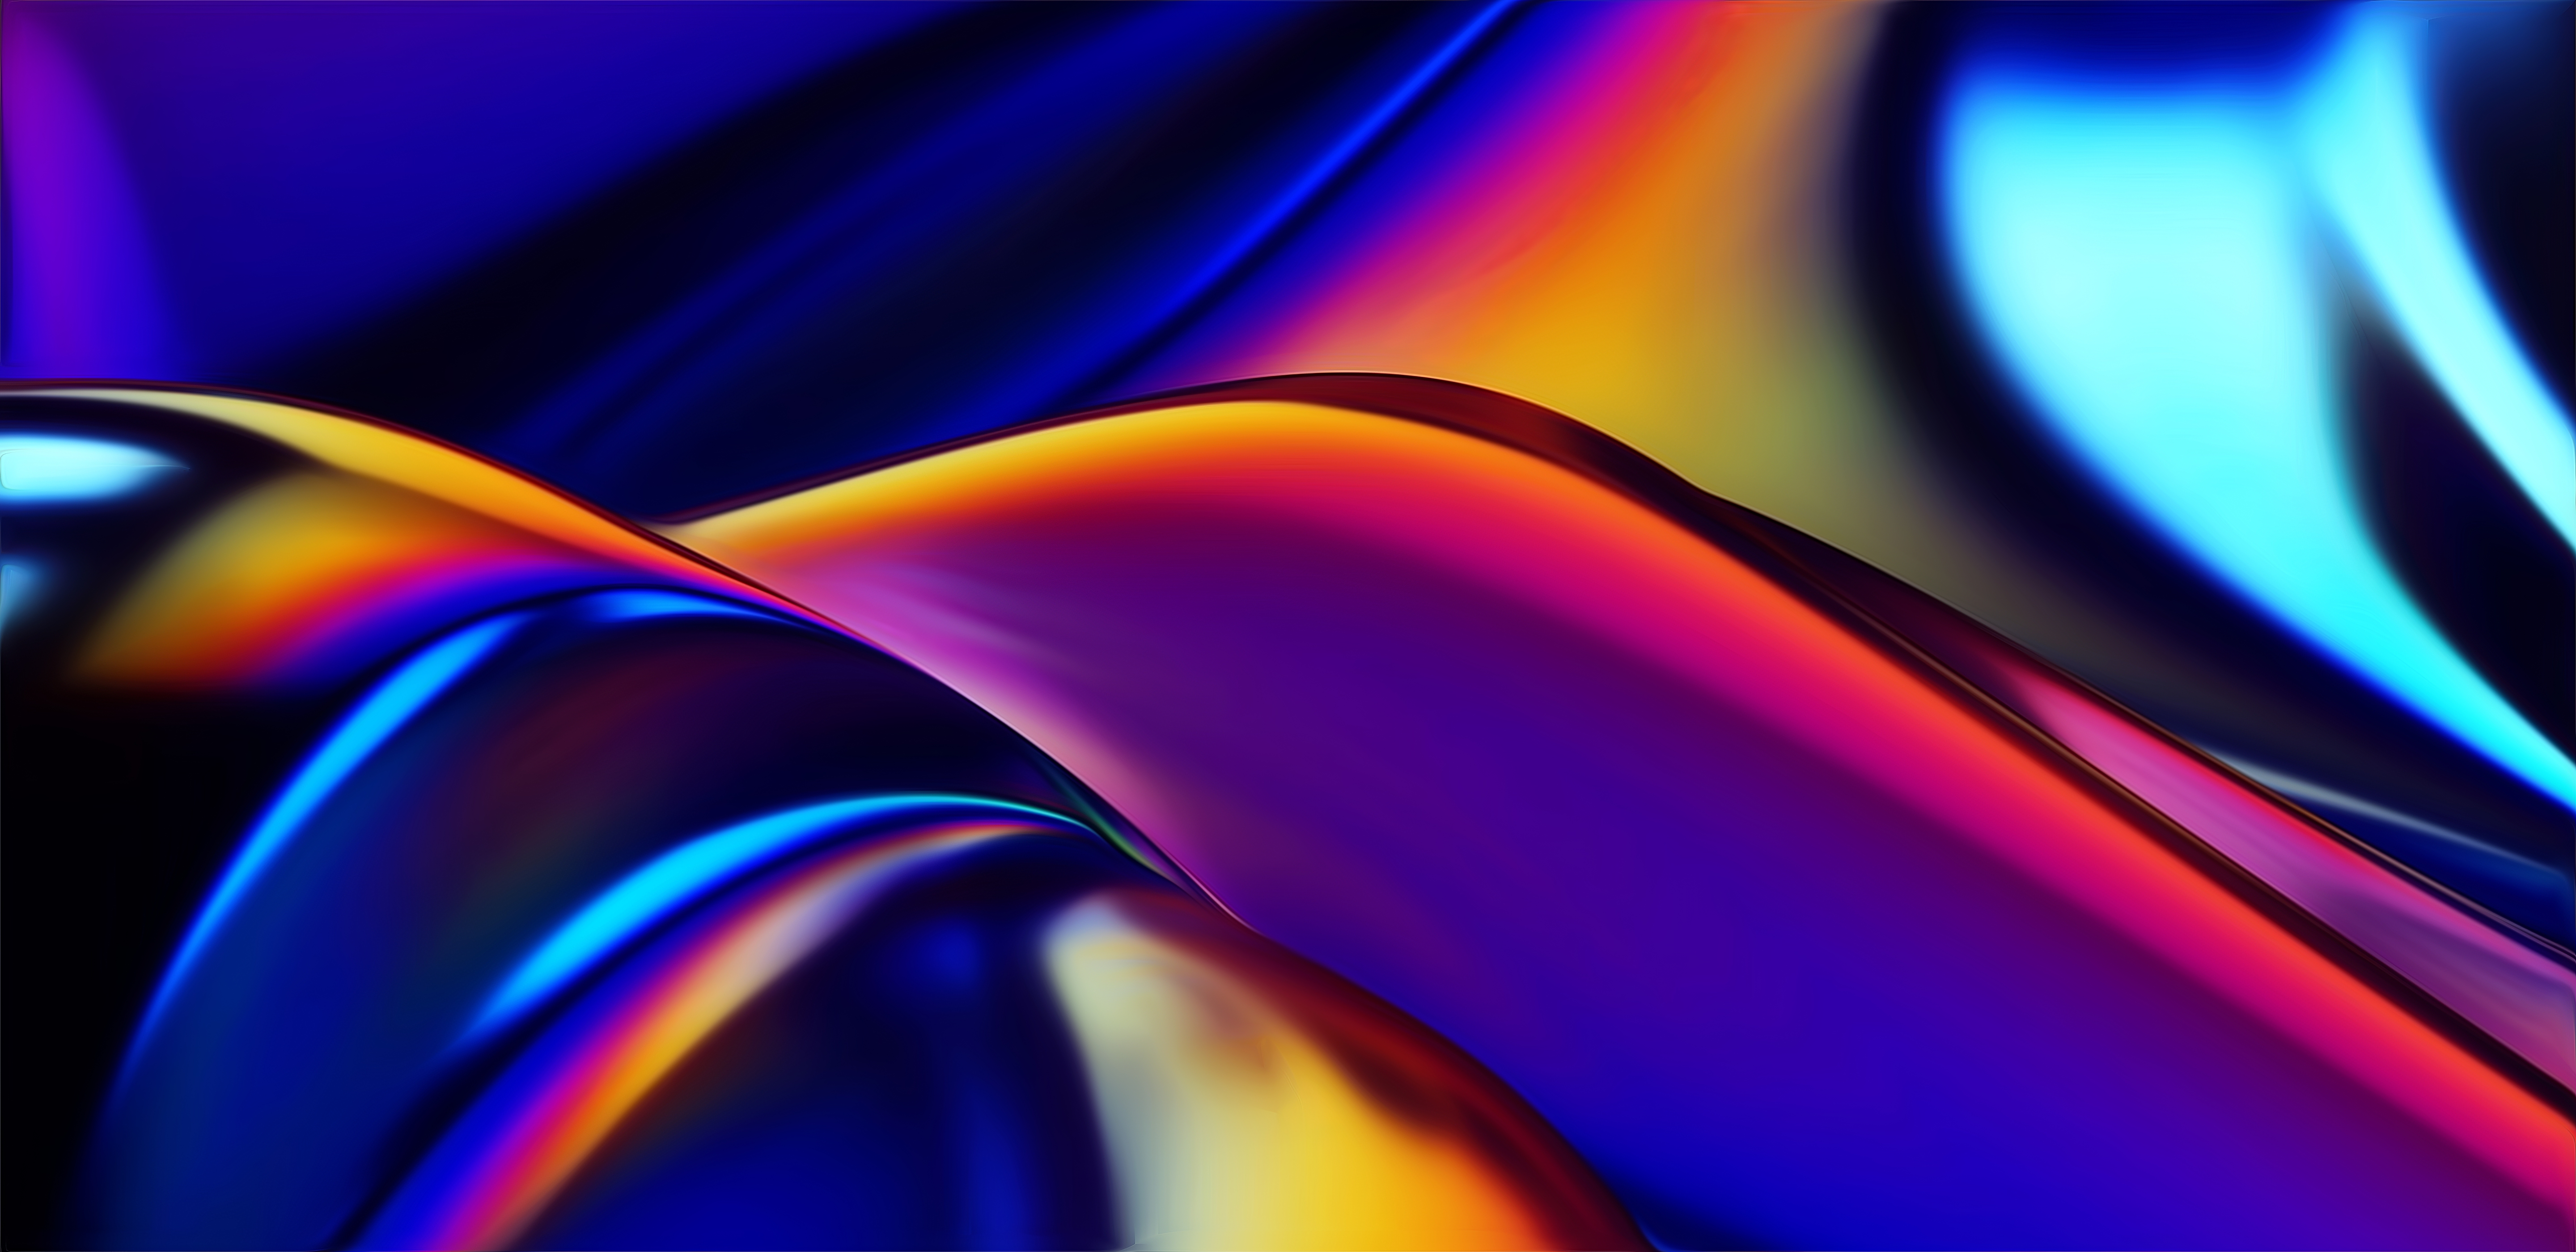 HD wallpaper, 5K, Colorful, Stock, Apple Pro Display Xdr